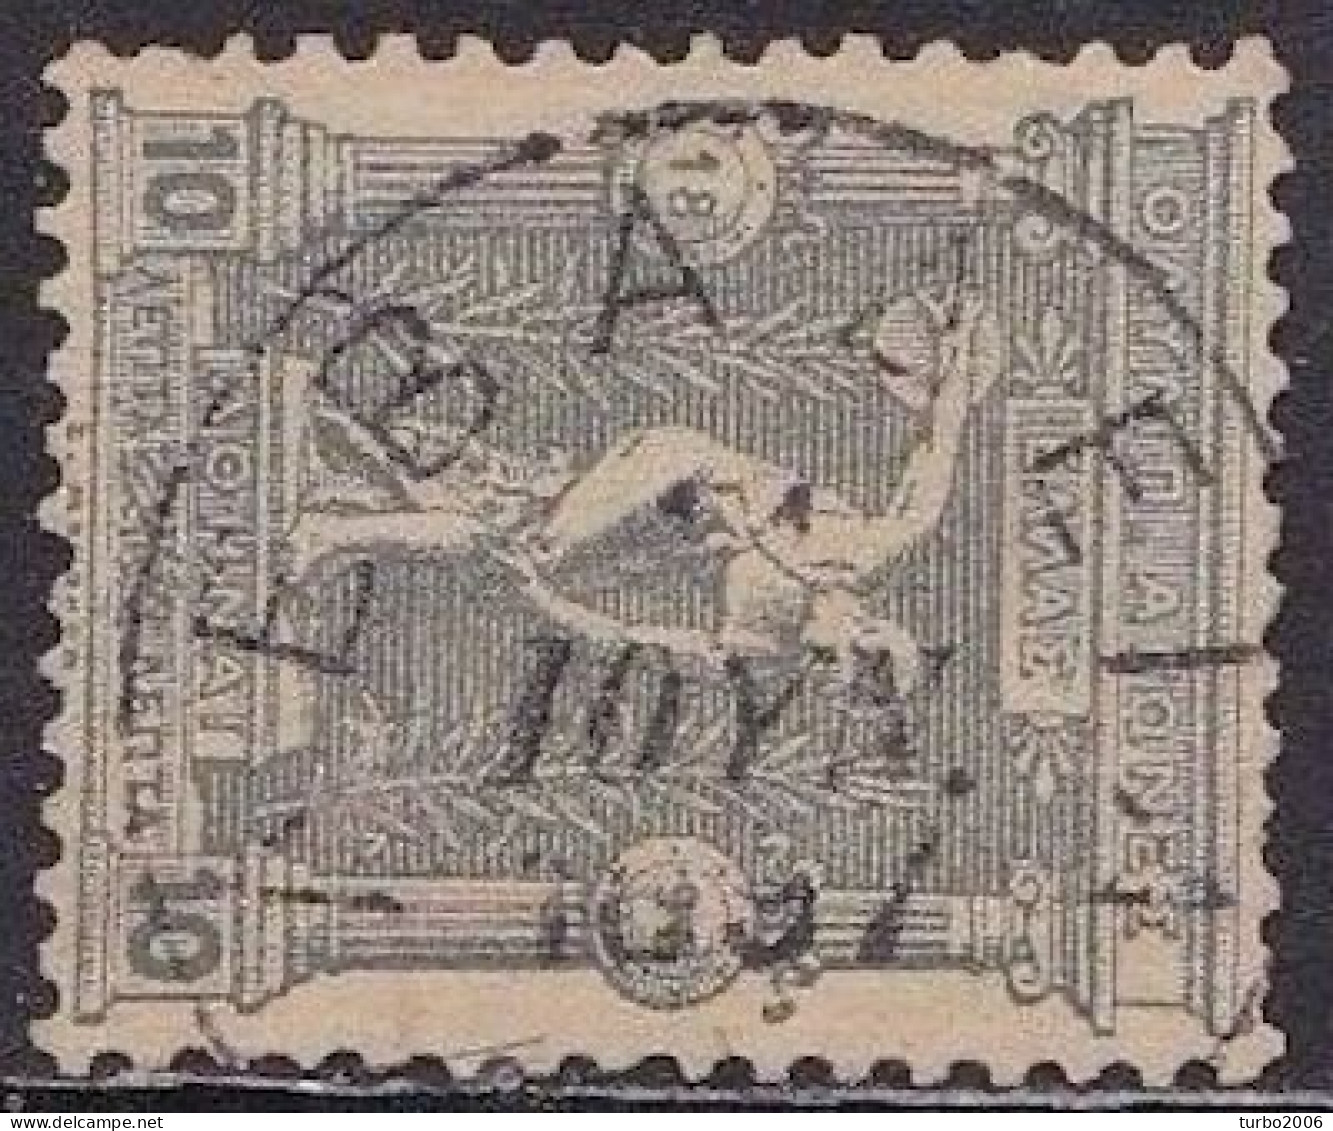 GREECE 1896 First Olympic Games 10 L Grey  Vl. 136 With Cancellation ΛΕΒΑΔΕΙΑ Type V - Gebraucht